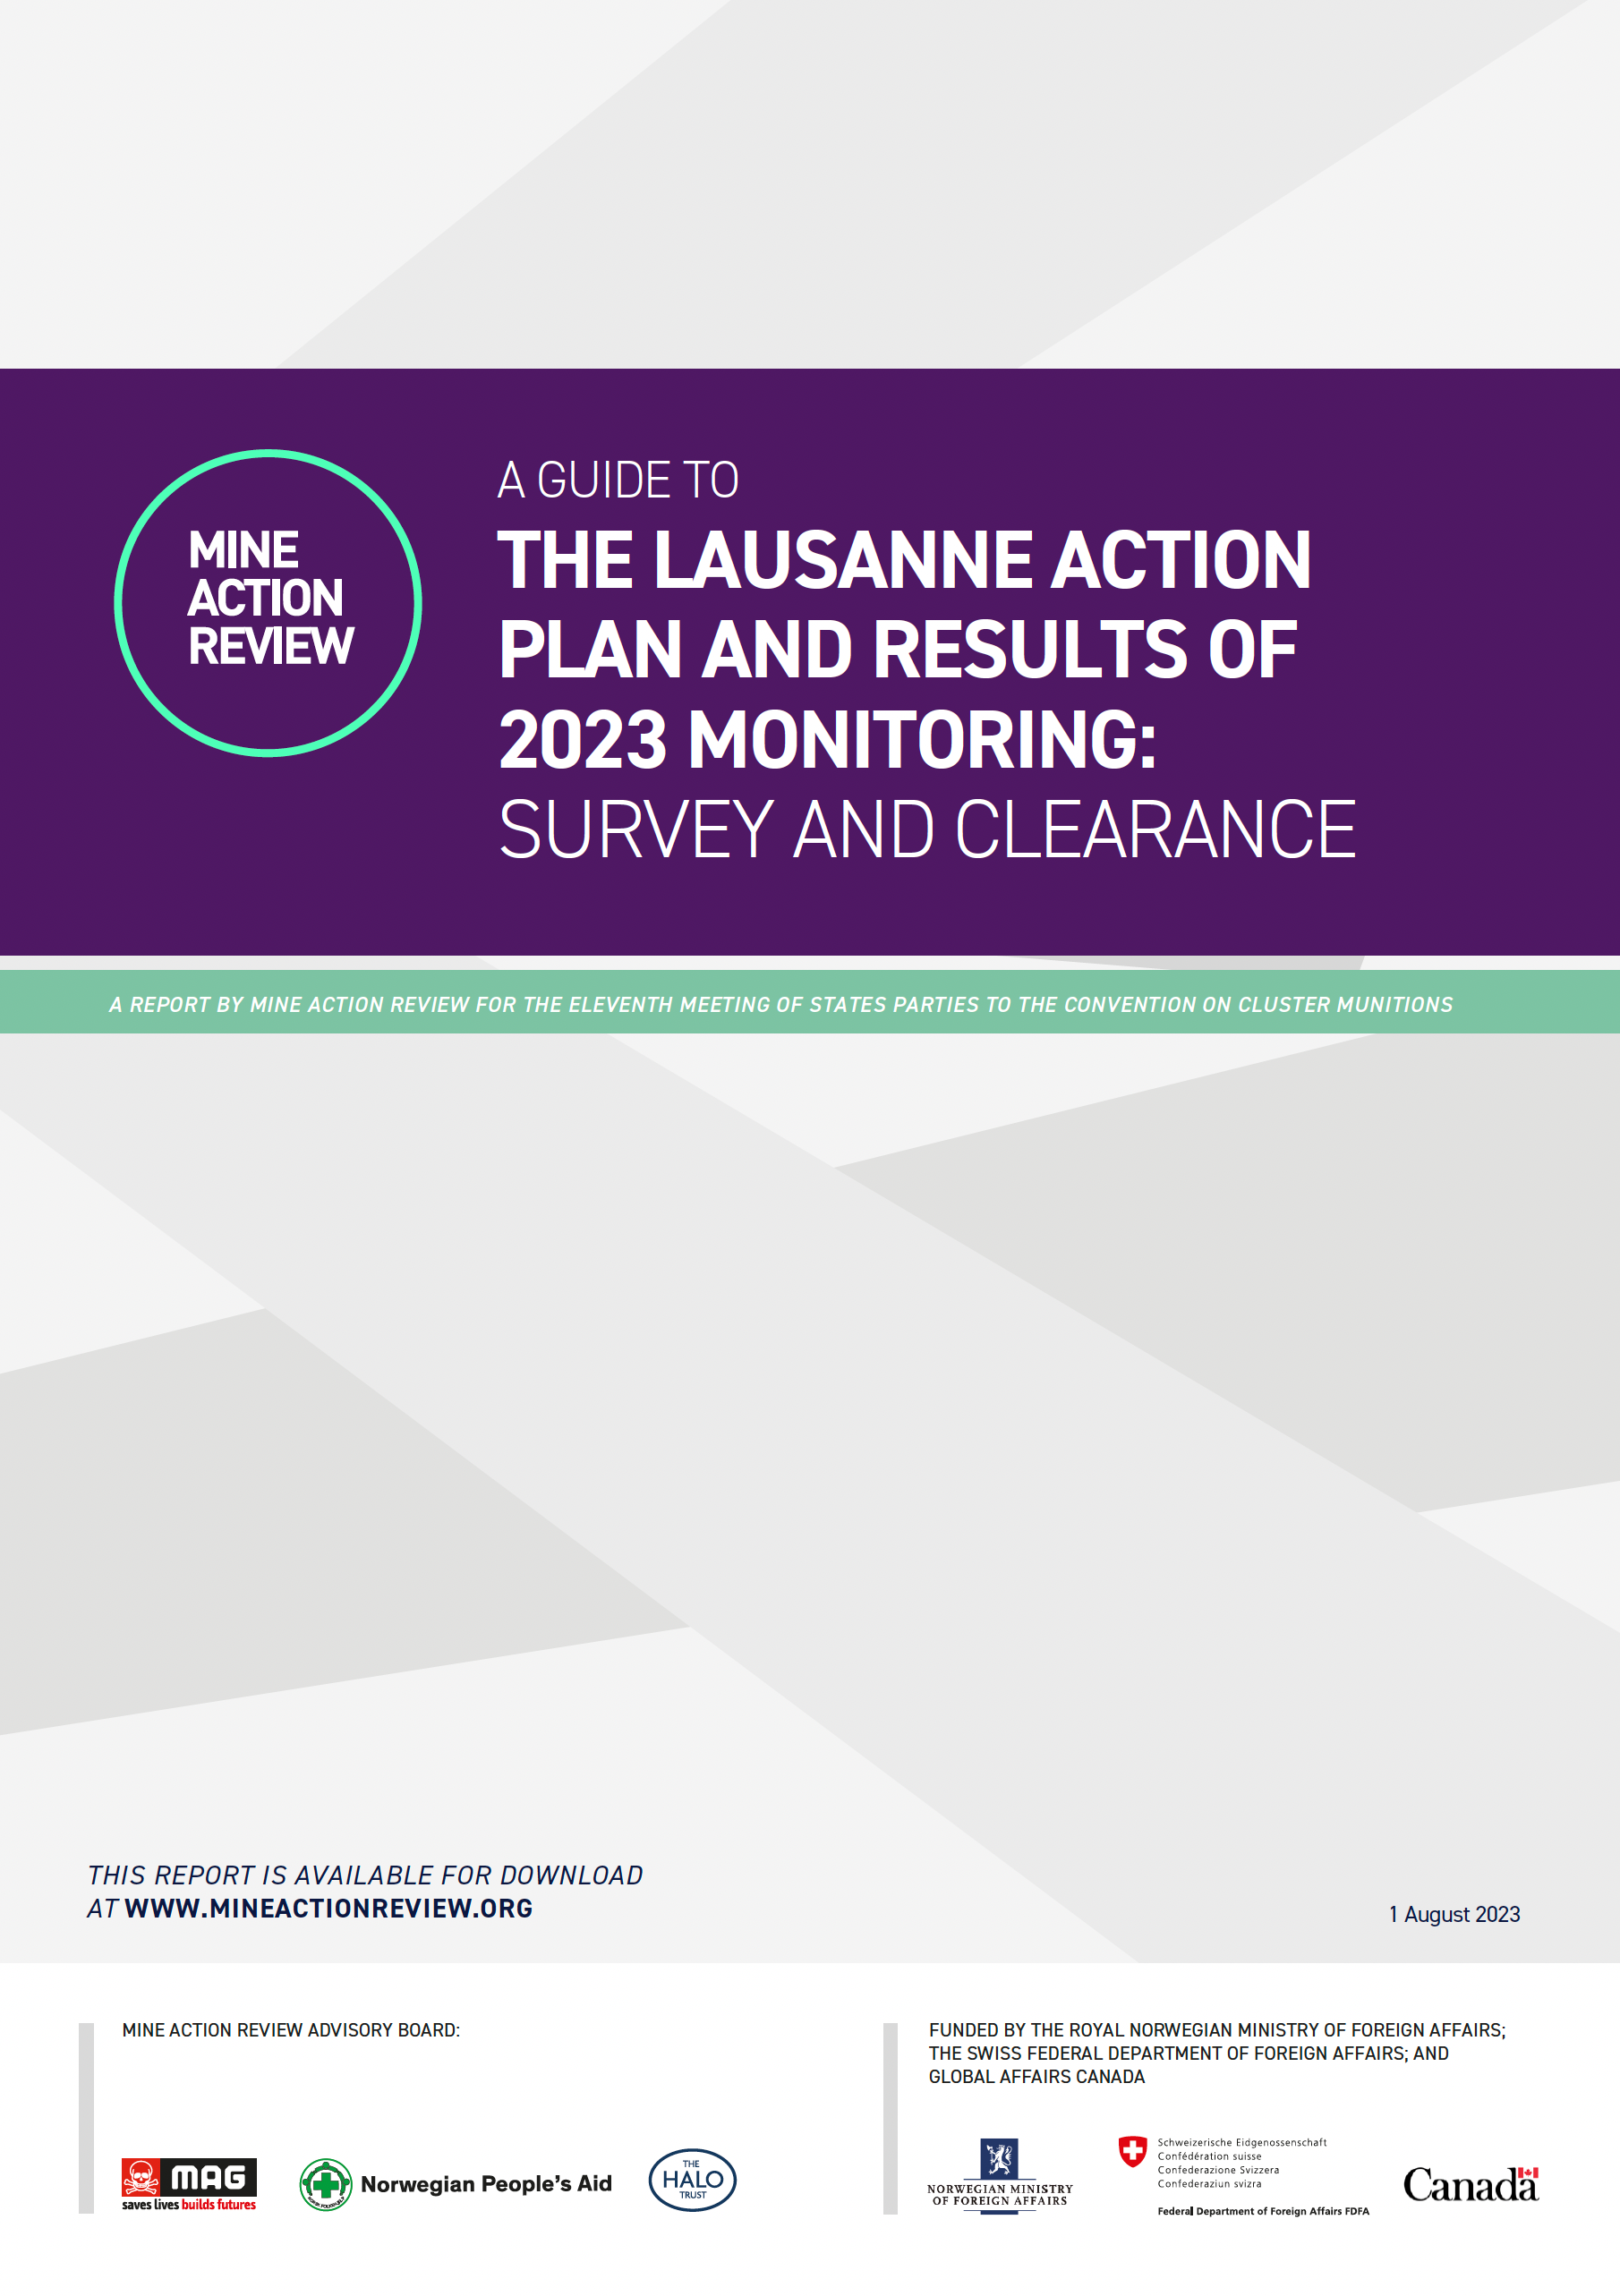 Guide to the Lausanne Action Plan and Results of the 2023 Monitoring